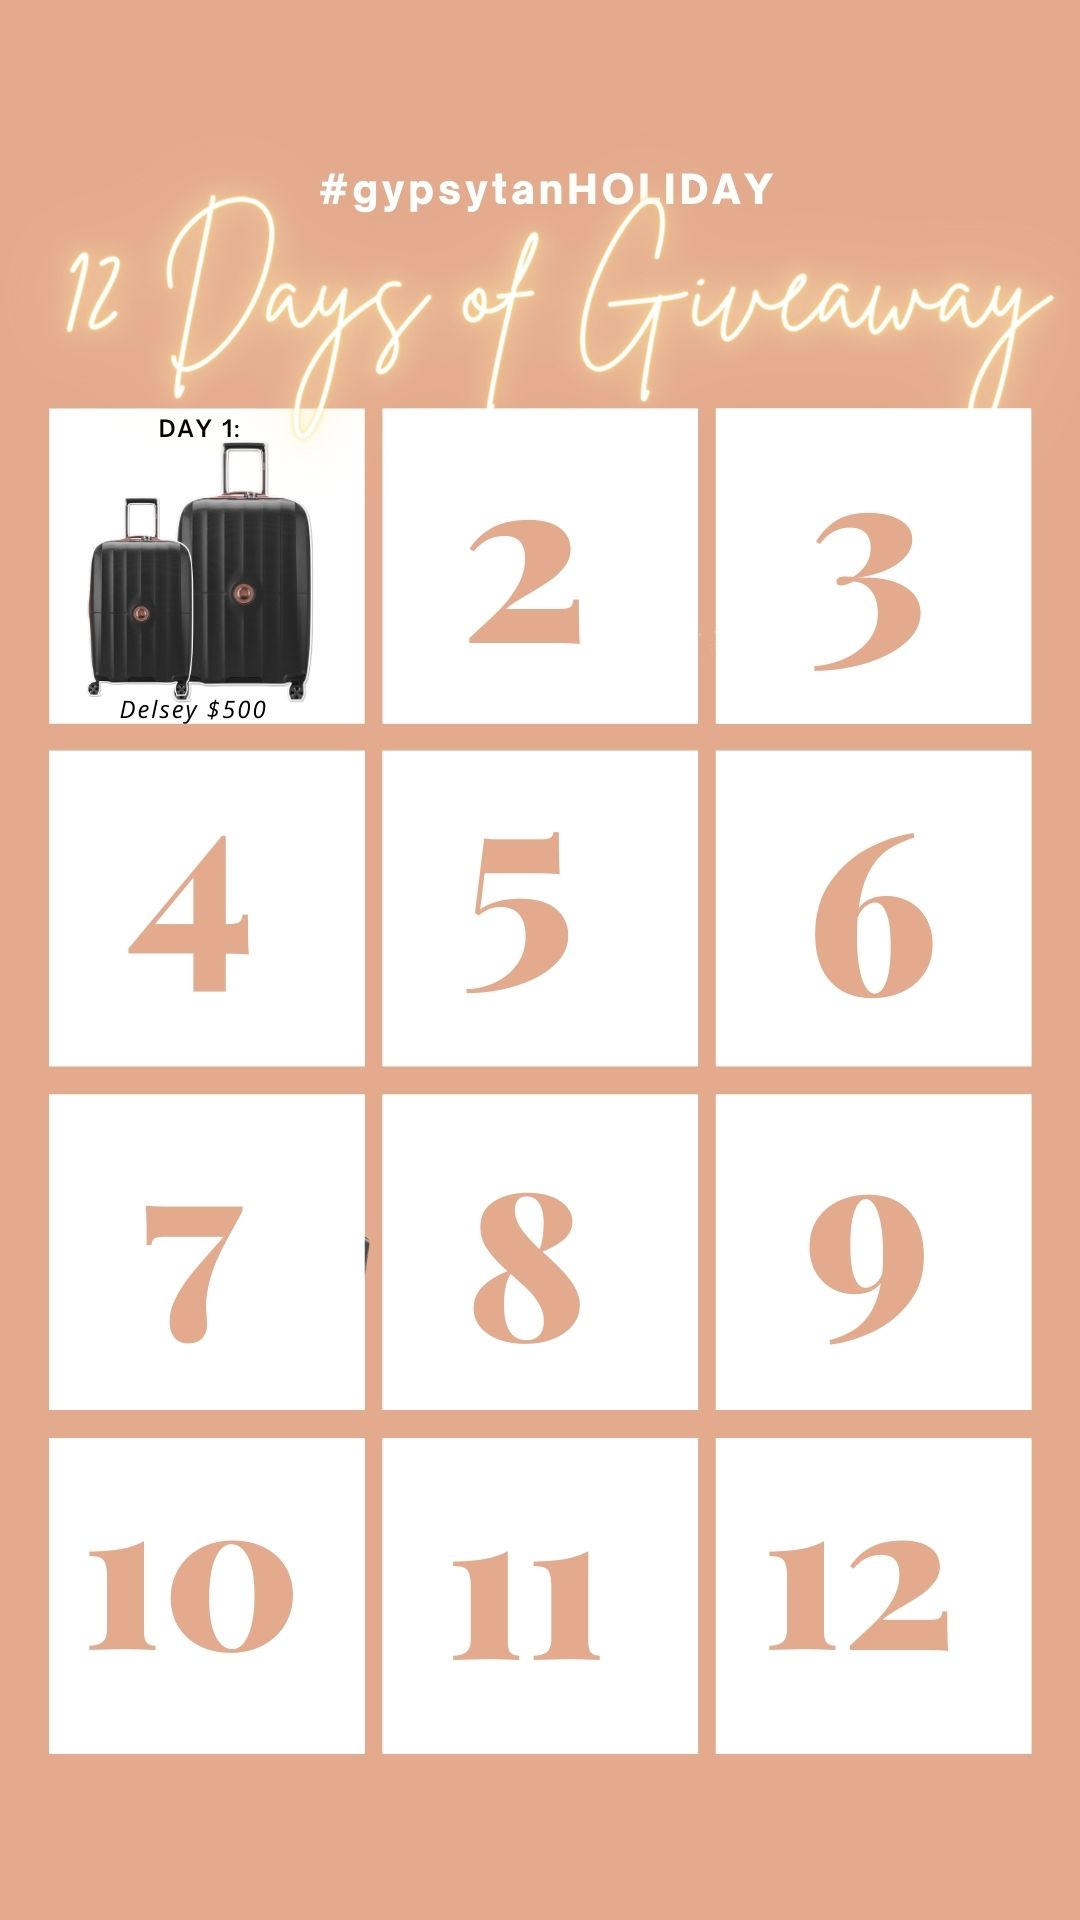 12 days of Giveaway - Delsey Luggage